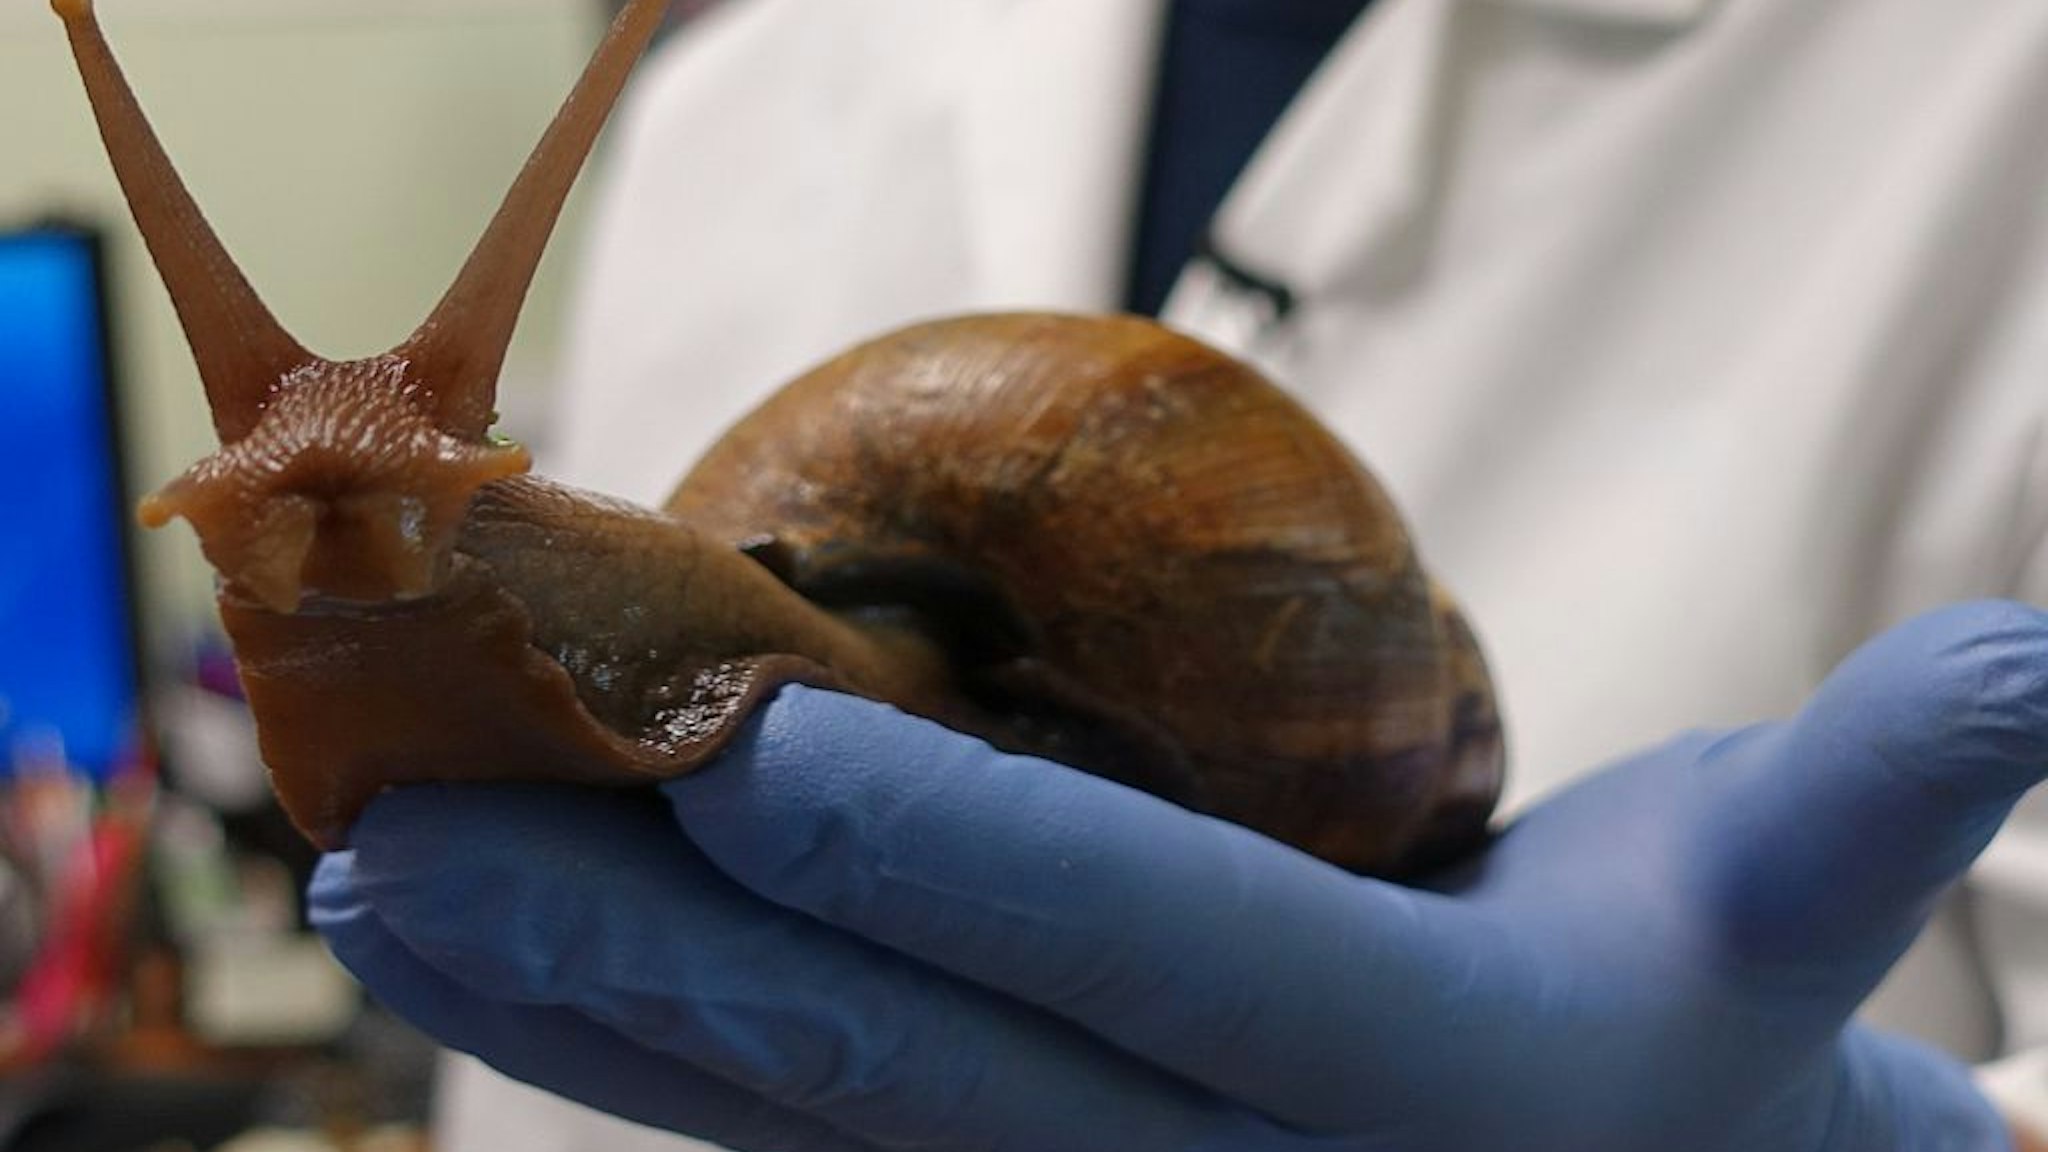 Scientist Mary Yong Cong holds one of the Giant African Snails she keeps in her lab in Miami, Florida on July 17, 2015. Florida plant detectives are hot on the trail of a slippery foe, an invasive African land snail that is wily, potentially infectious, and can grow as big as a tennis shoe. In the four years since Giant African Snails were discovered in Miami, they have slowly but surely spread to new territory in the southern suburbs and even northward into the neighboring county of Broward. AFP PHOTO/KERRY SHERIDAN (Photo credit should read KERRY SHERIDAN/AFP via Getty Images)